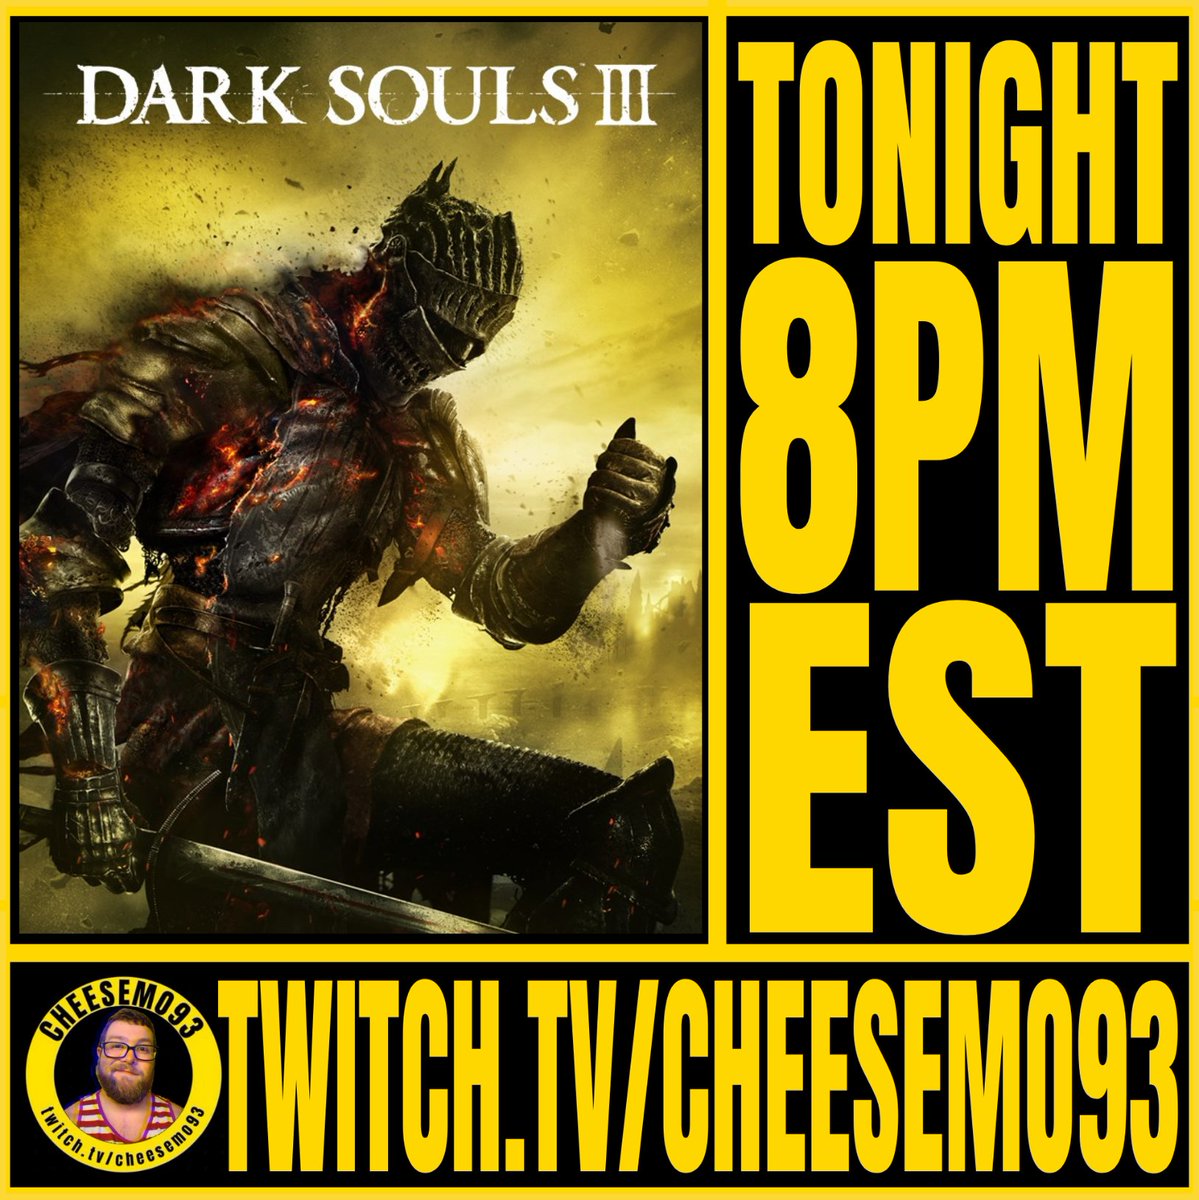 Goin live tonight at 8pm EST with some Dark Souls 3! Twitch.tv/cheesemo93 #streamer #smallstreamer #lgbtqiastreamer #queerstreamer #gaystreamer #ds3stream